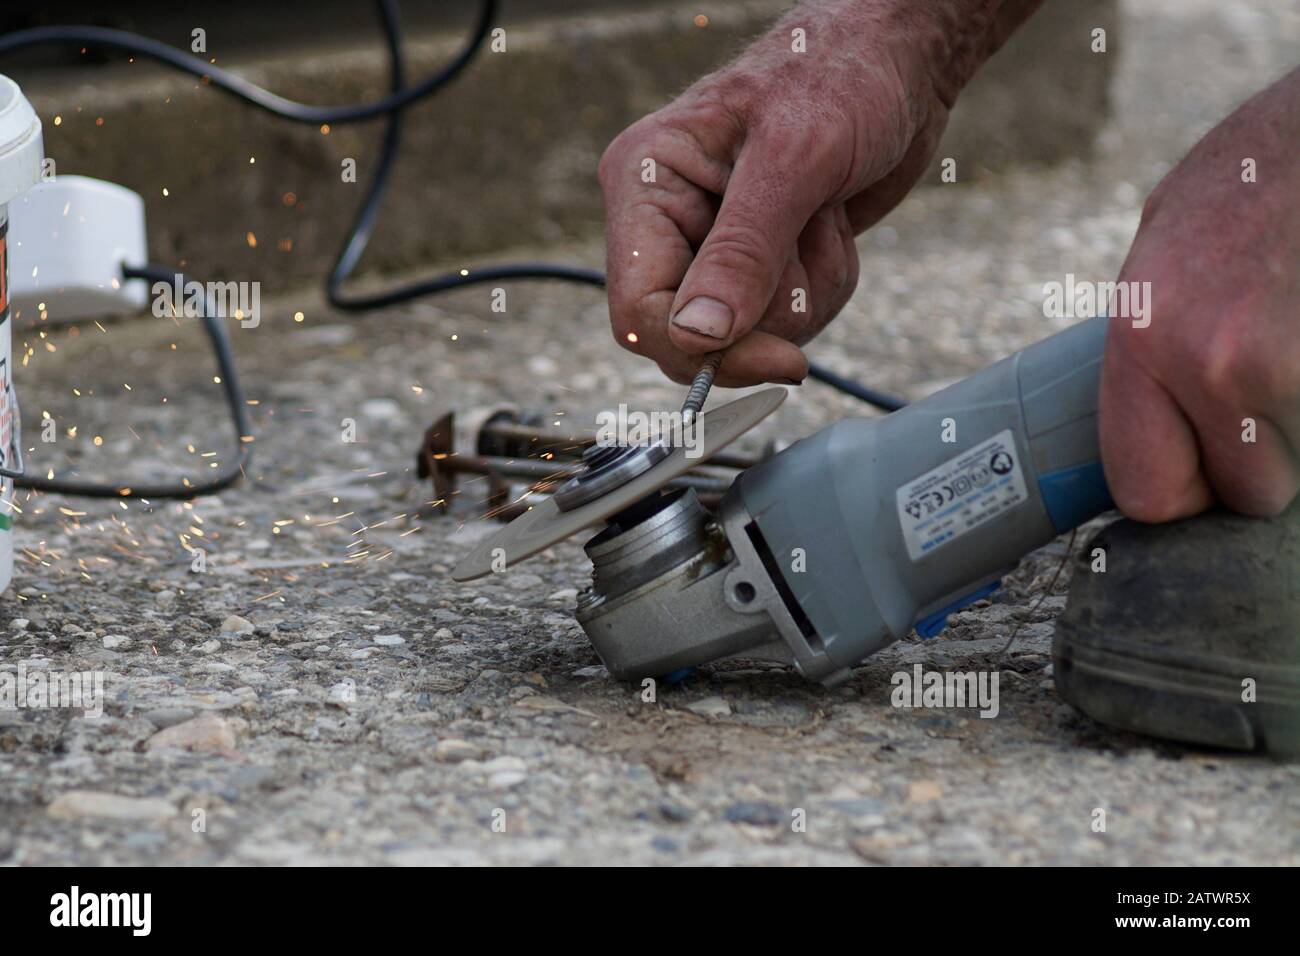 Man is sharpening nail on the grinding machine Stock Photo